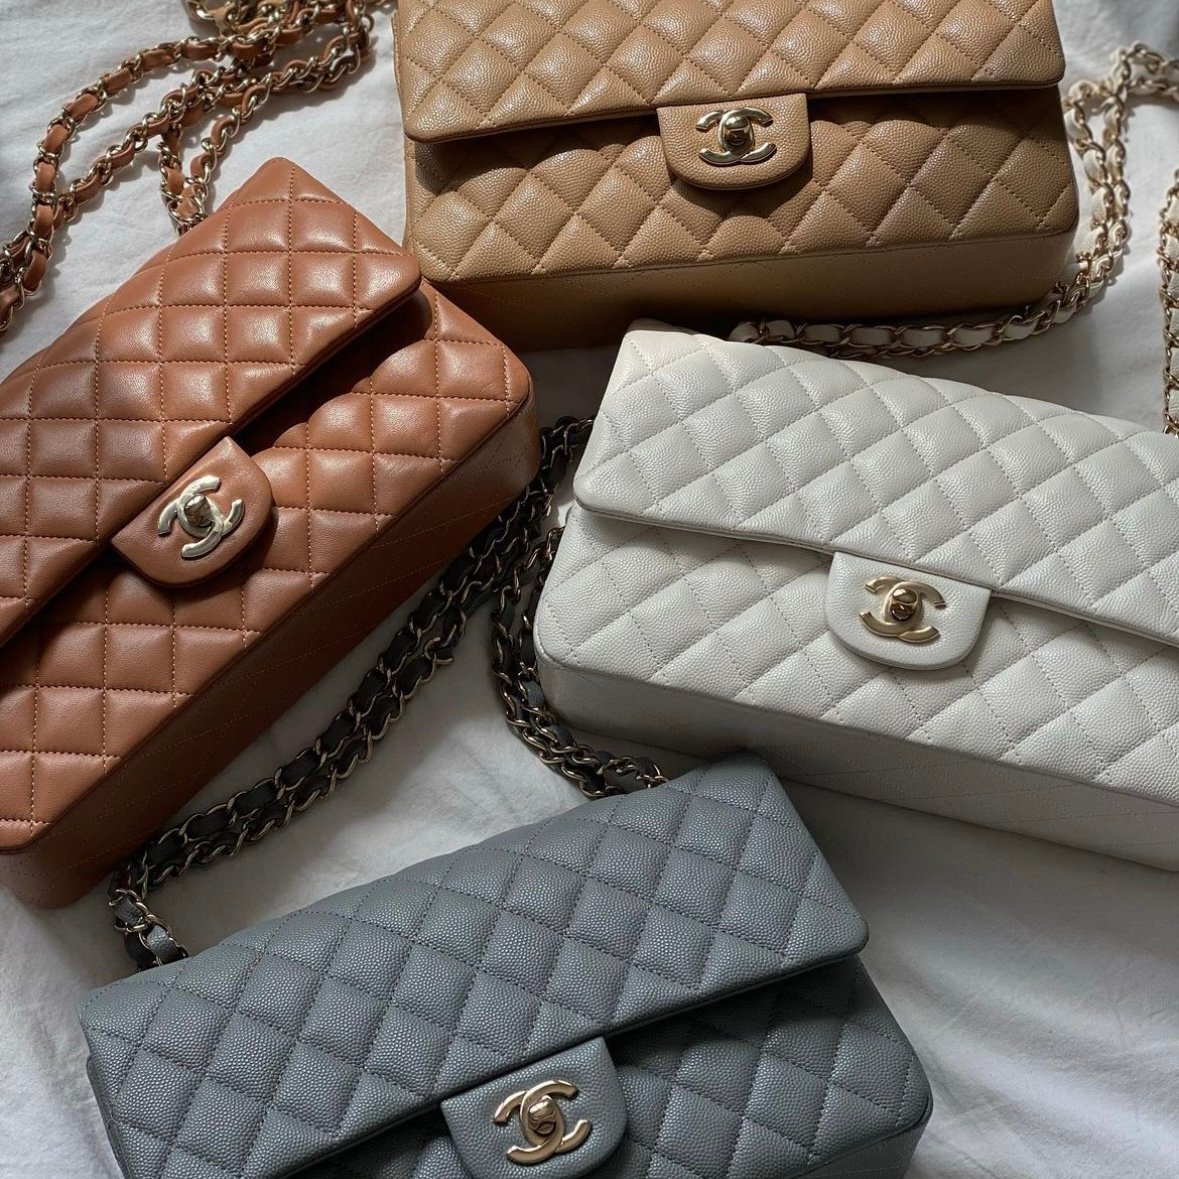 Chanel Handbag Prices Have Gone Up by 60% Since 2019, Aiming for Hermes  Status - Bloomberg